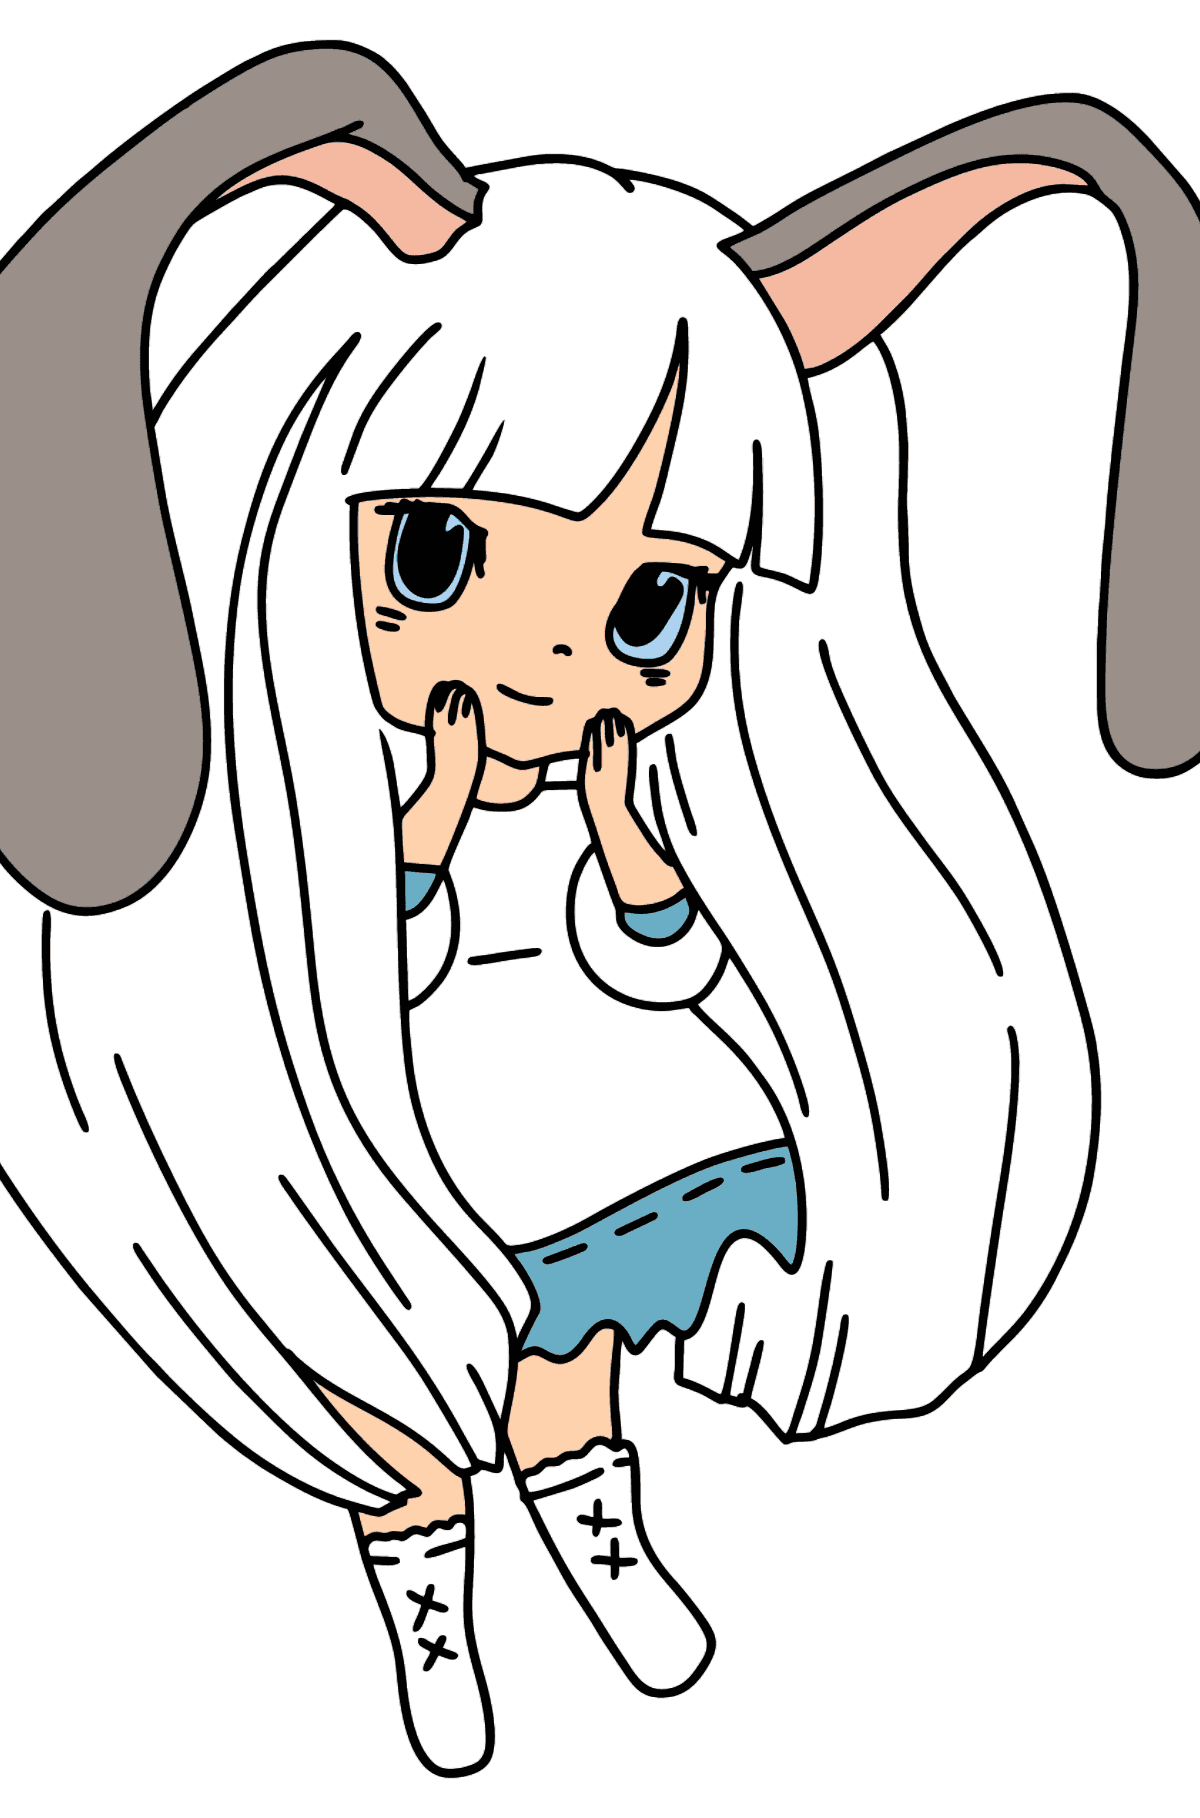 Anime Bunny Girl Coloring Pages - Coloring Pages for Kids